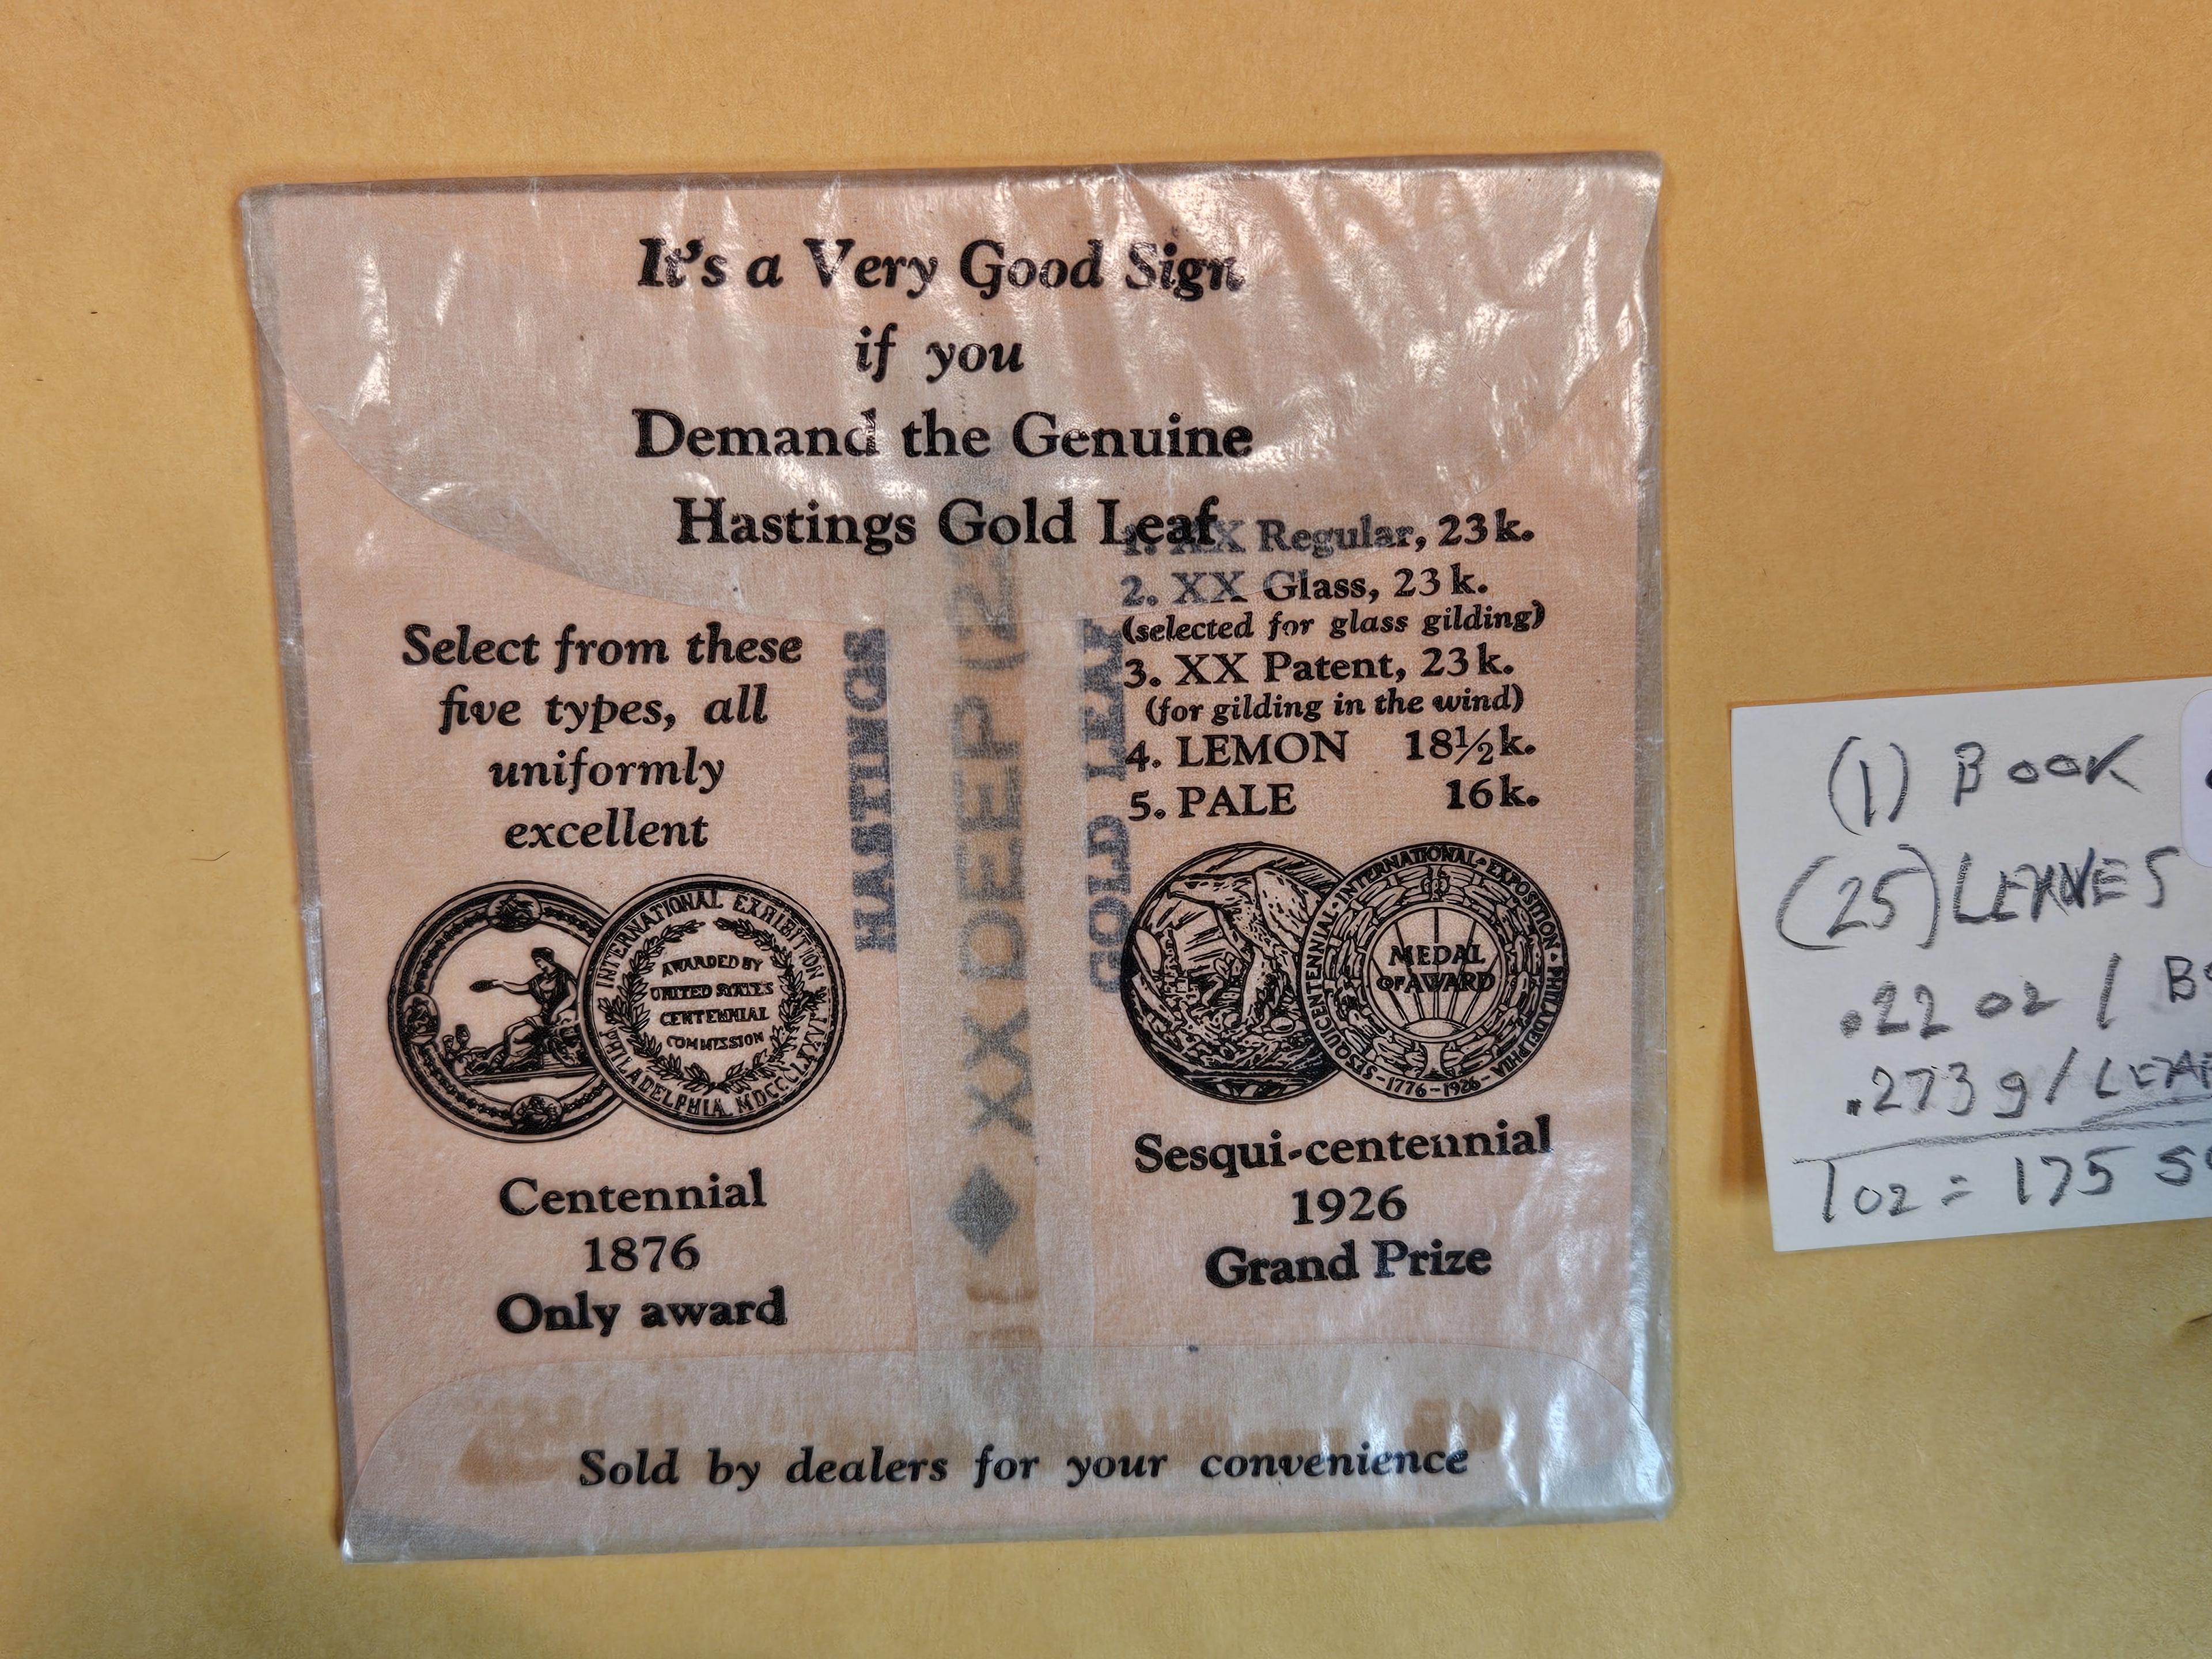 GOLD! Real, Usable, Gold Leaf from Hastings!